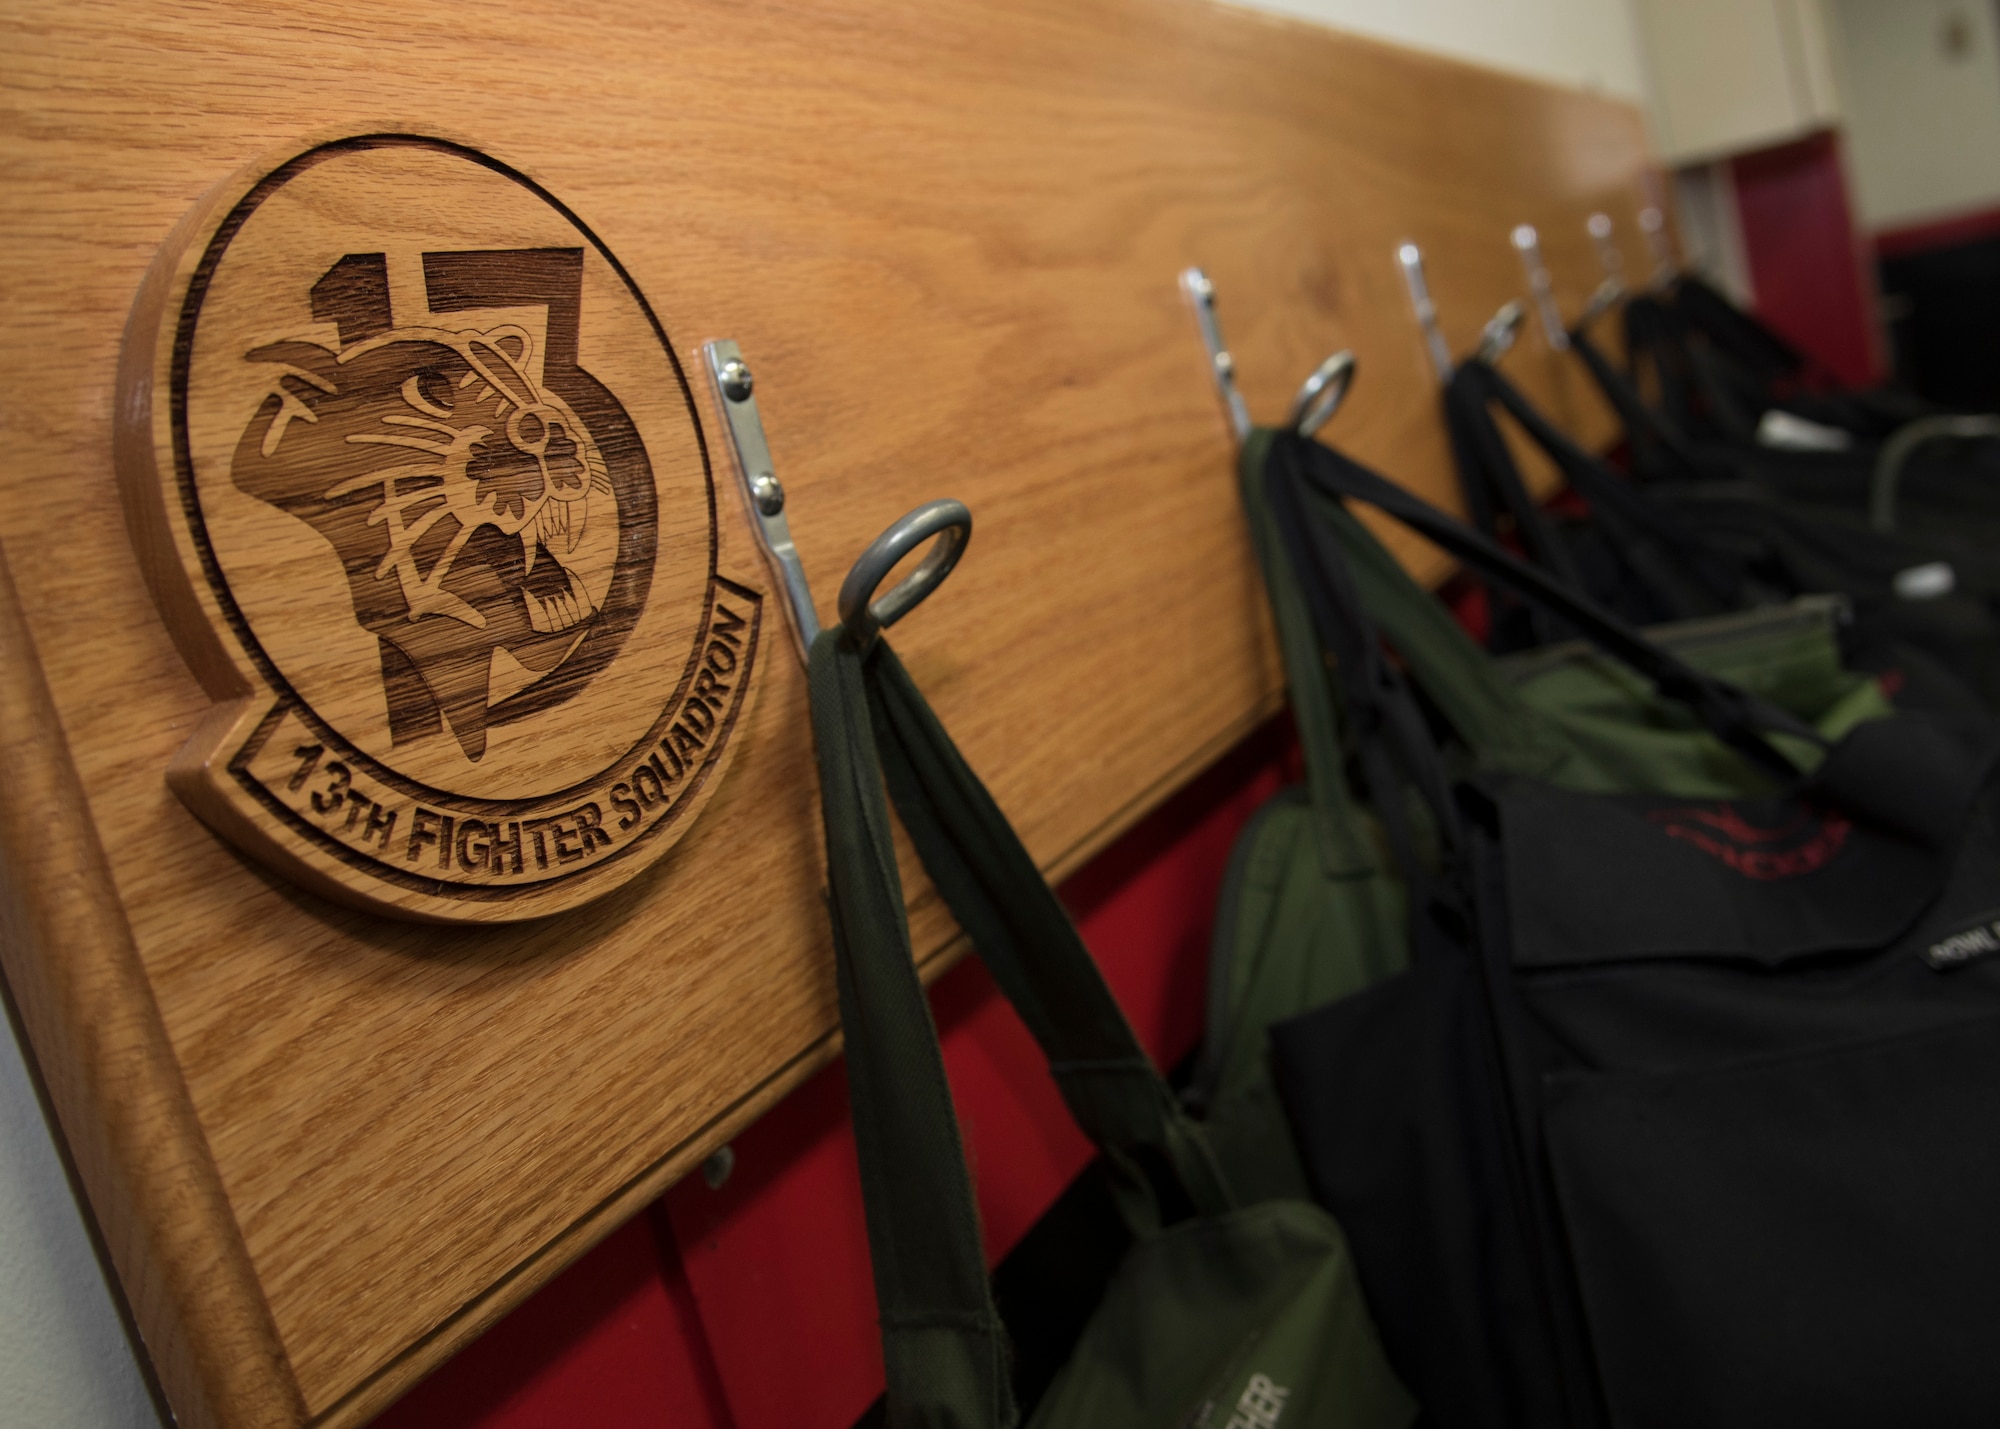 Pilot helmet bags hang on a wall at Misawa Air Base, Japan, May 4, 2016. Before each mission, pilots collect necessary equipment and attend briefings to ensure preparedness. Flight briefs cover rules and regulations, objectives and aircraft coordination. (U.S. Air Force photo by Airman 1st Class Jordyn Fetter)